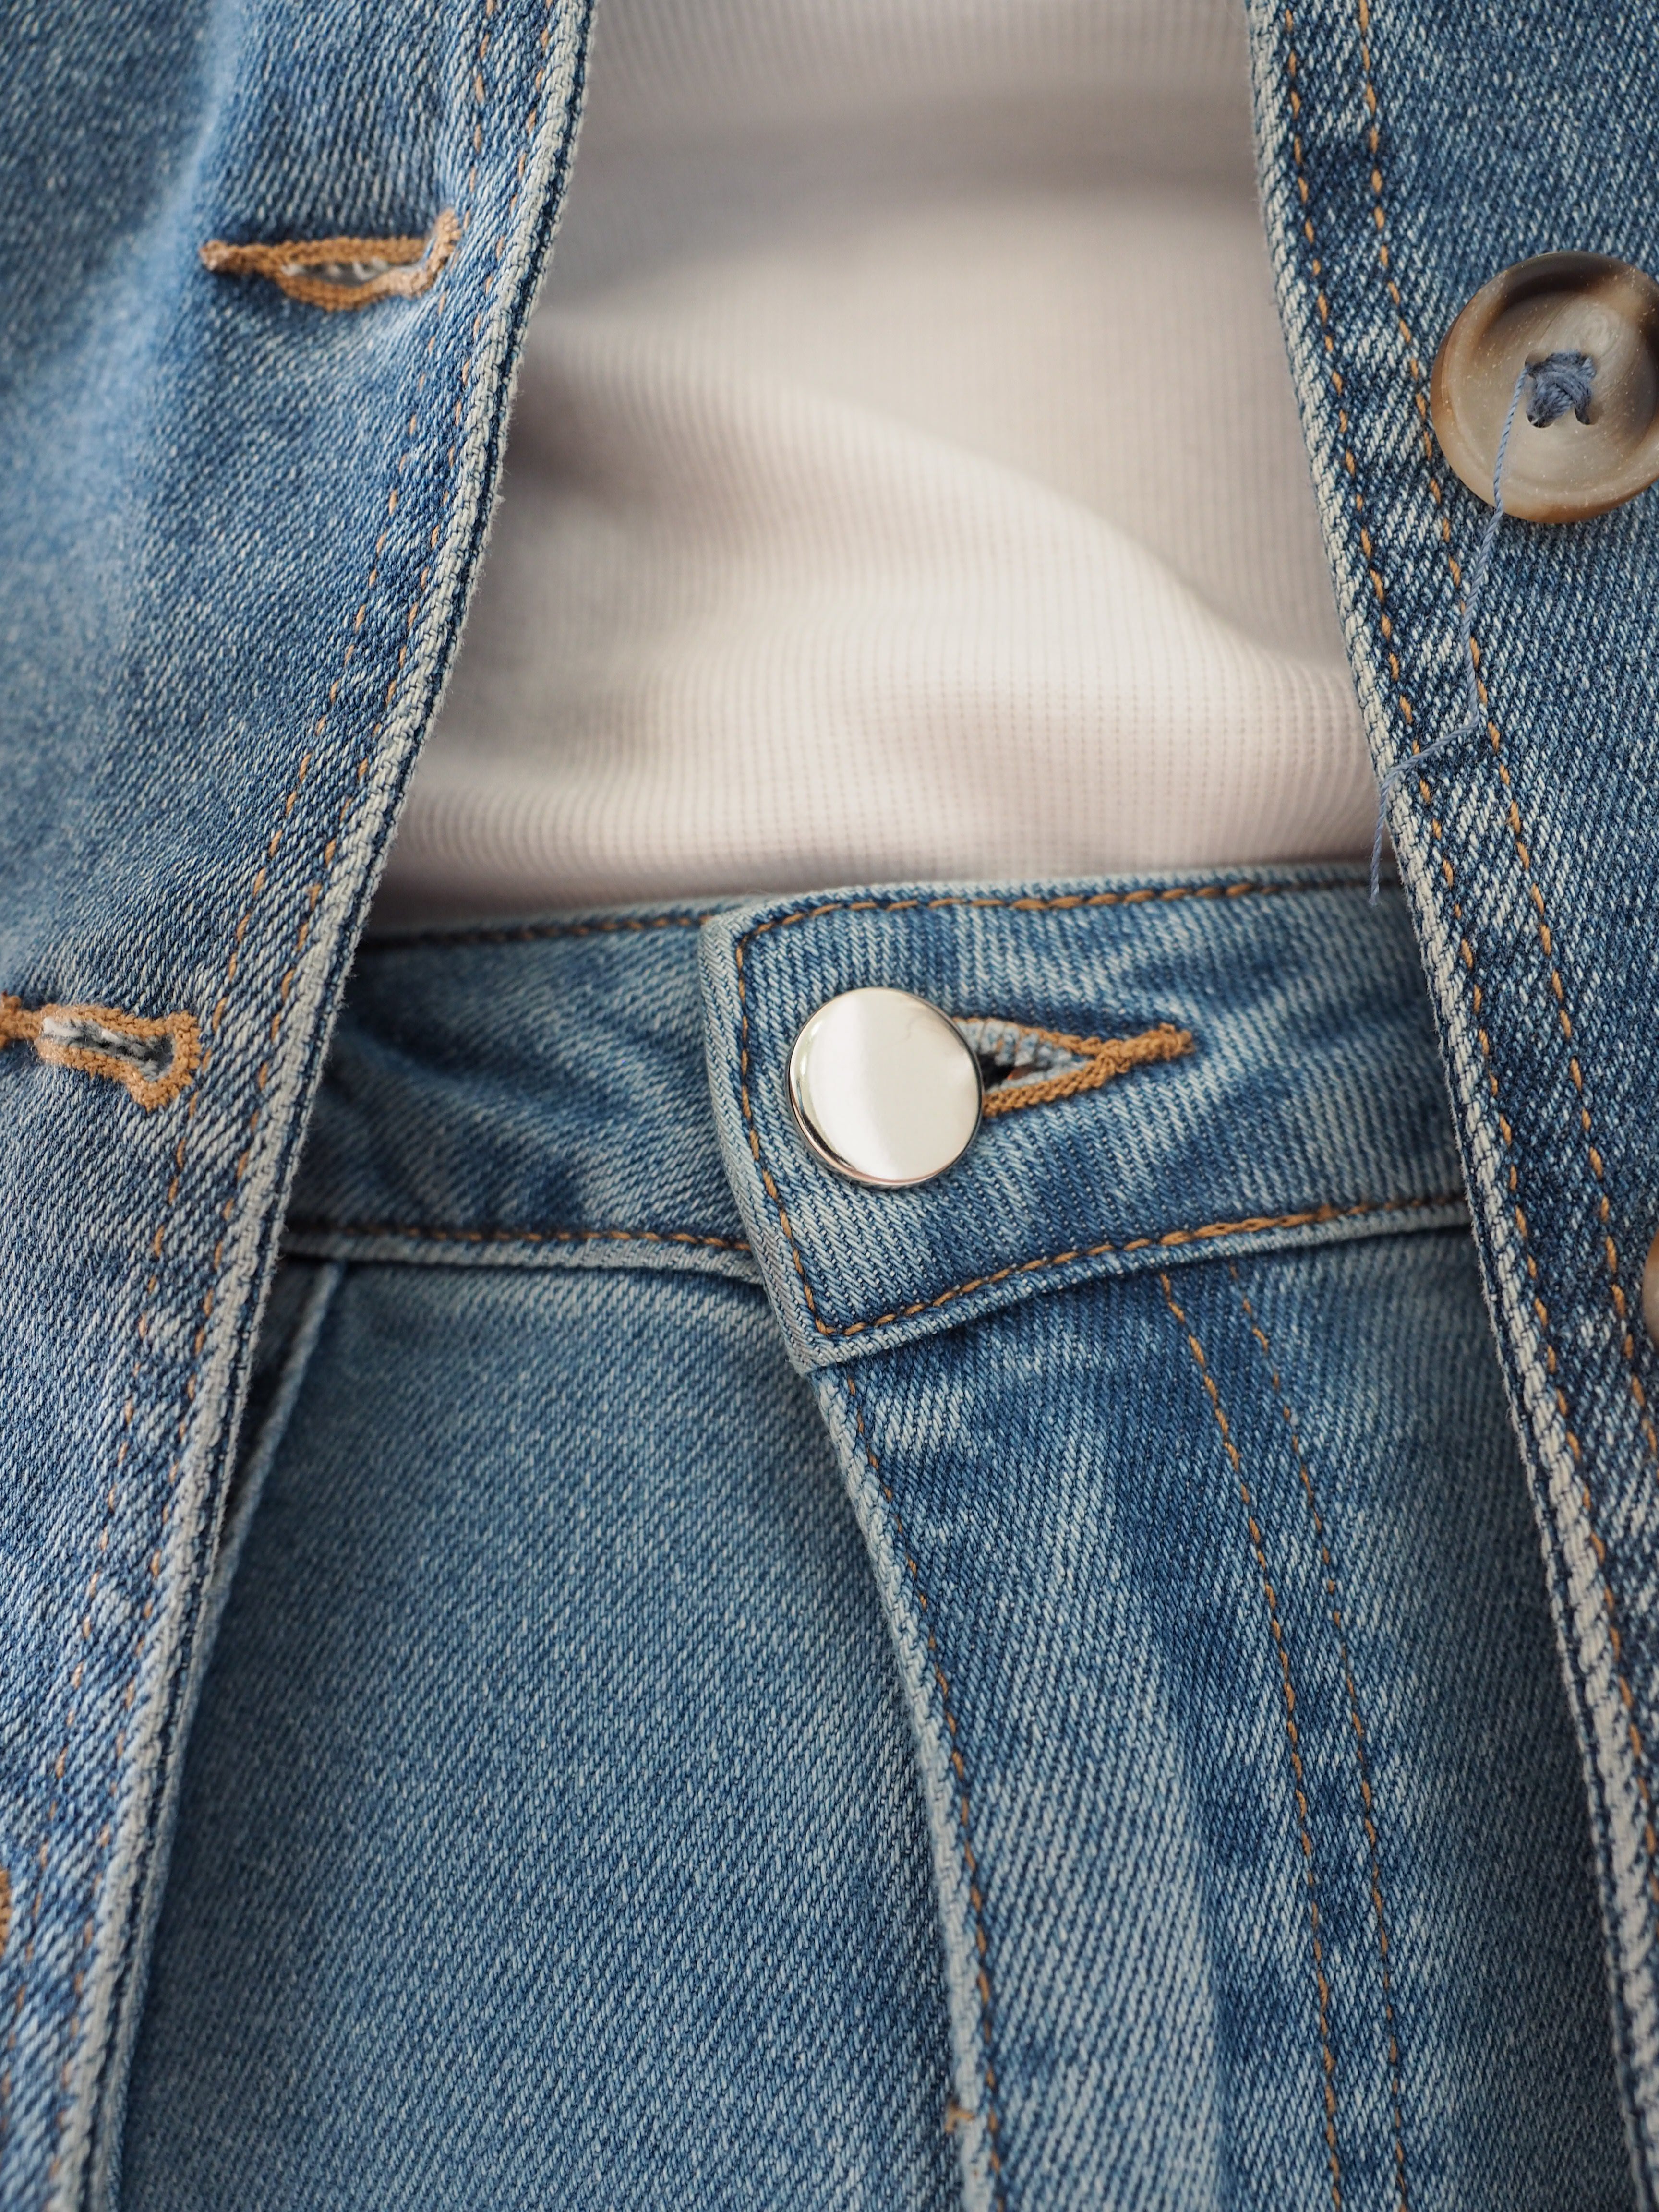 Removable Button Pins / Denim Pins (2 Pack)